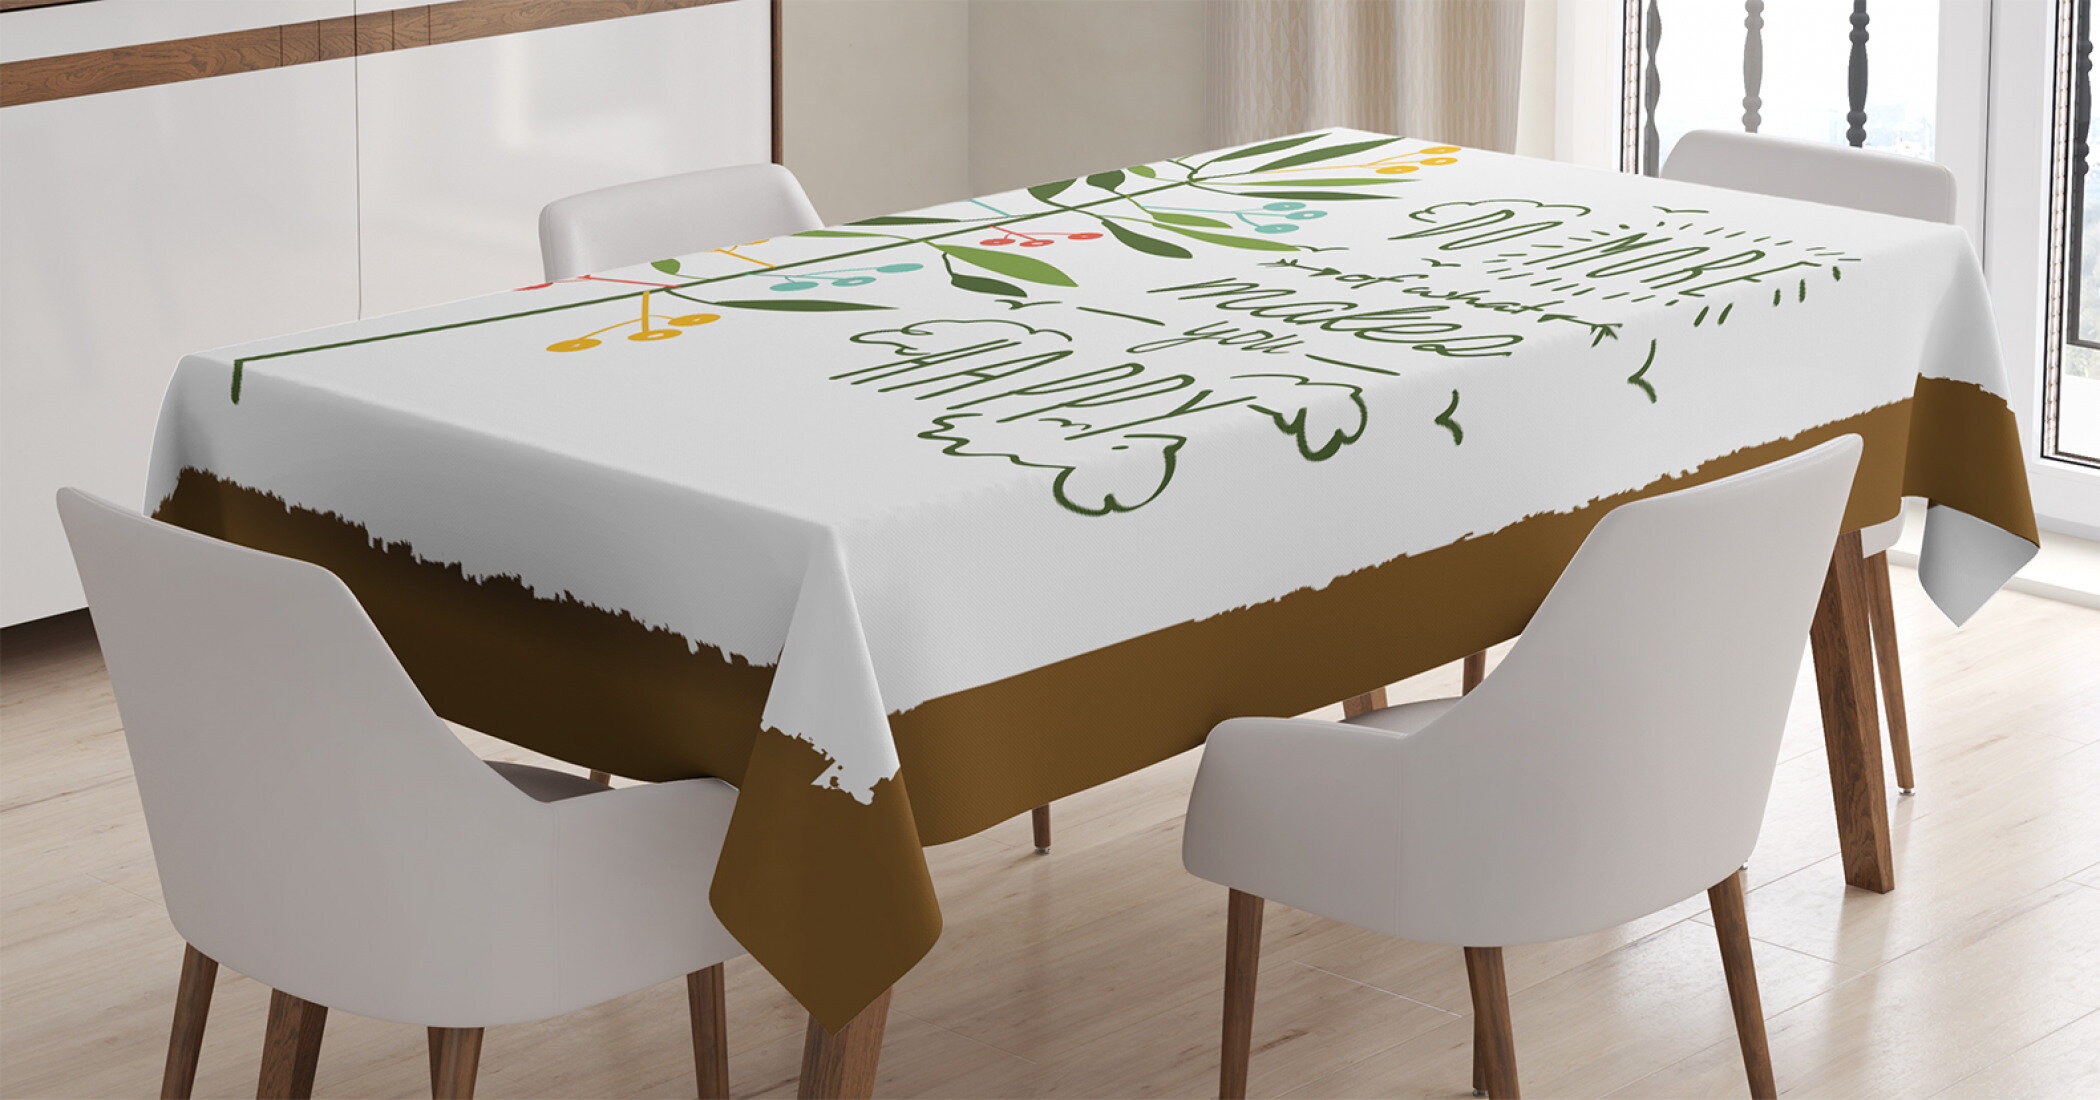 Details about   Ambesonne Adventure Theme Tablecloth Table Cover for Dining Room Kitchen 